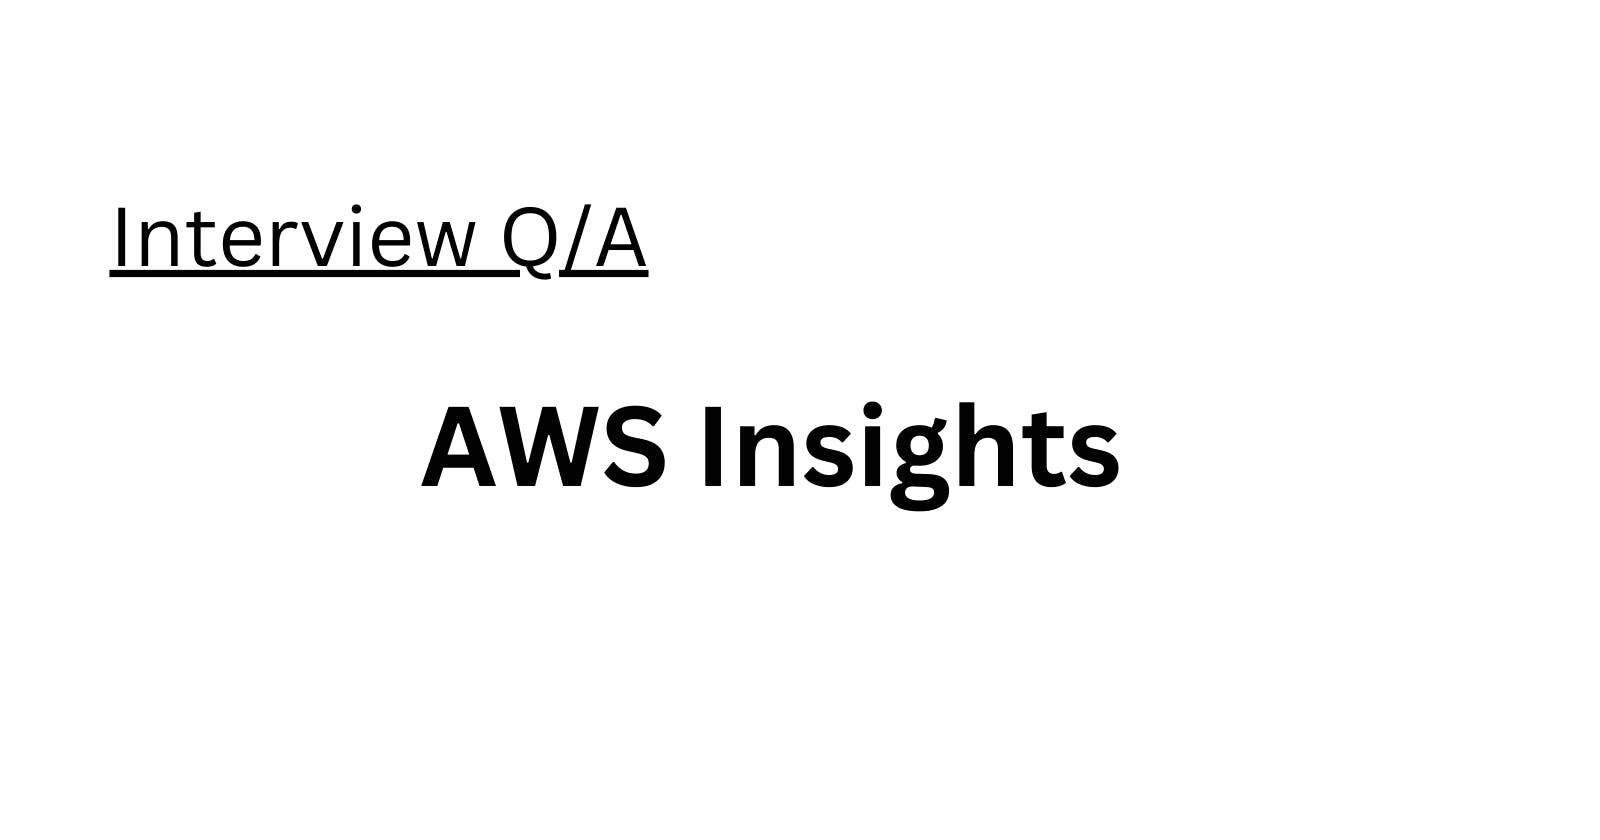 AWS Interview Insights